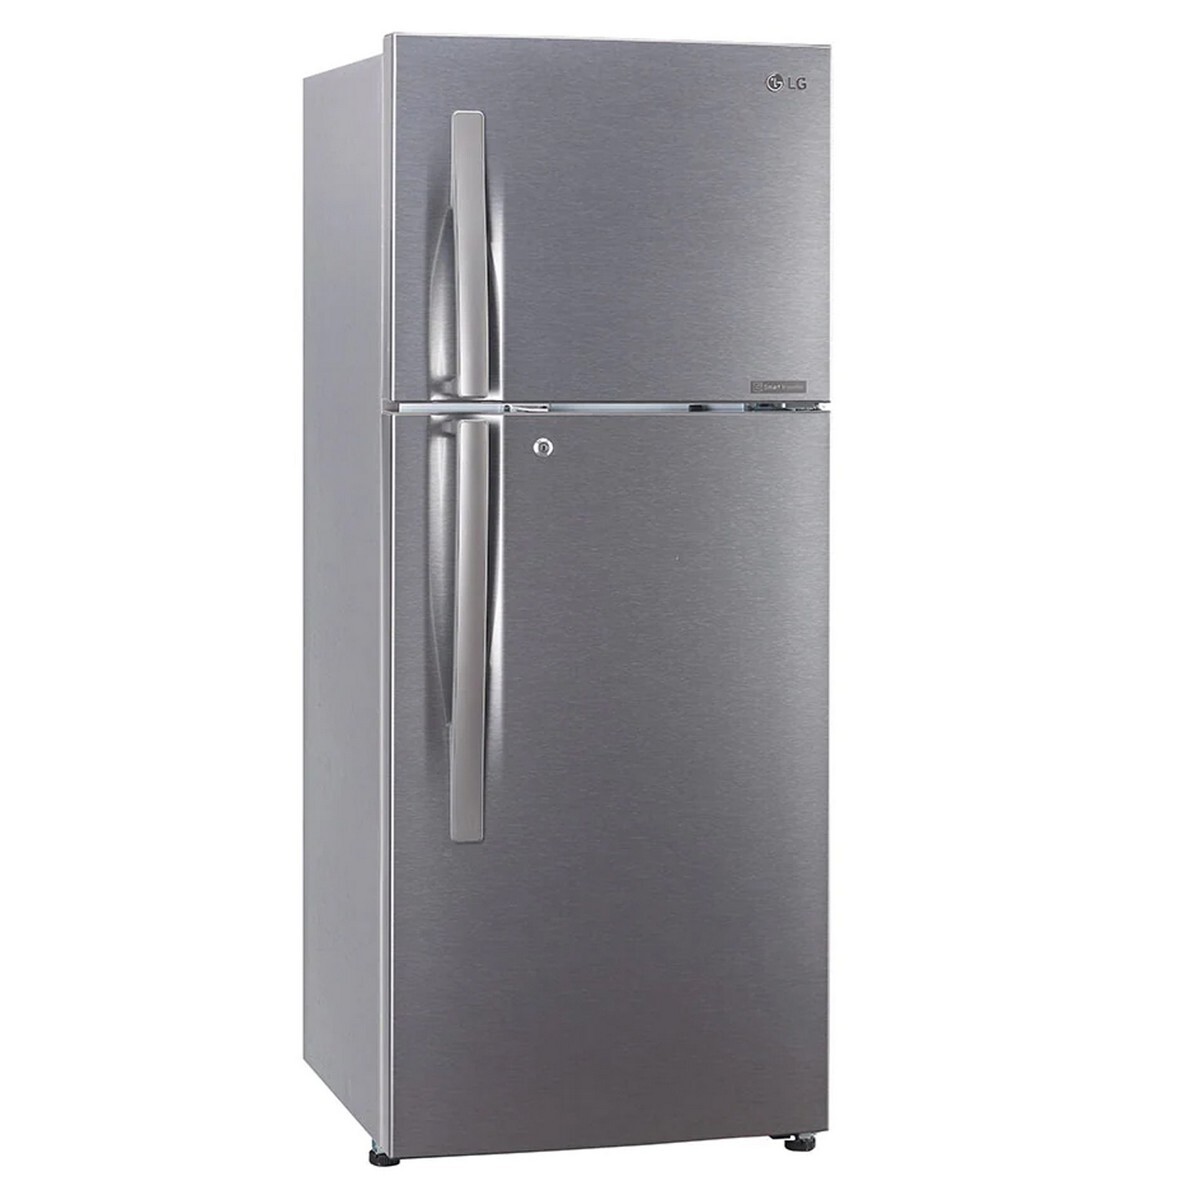 LG Frost Free Double Door Refrigerator GL-N292RDSY 260Ltr